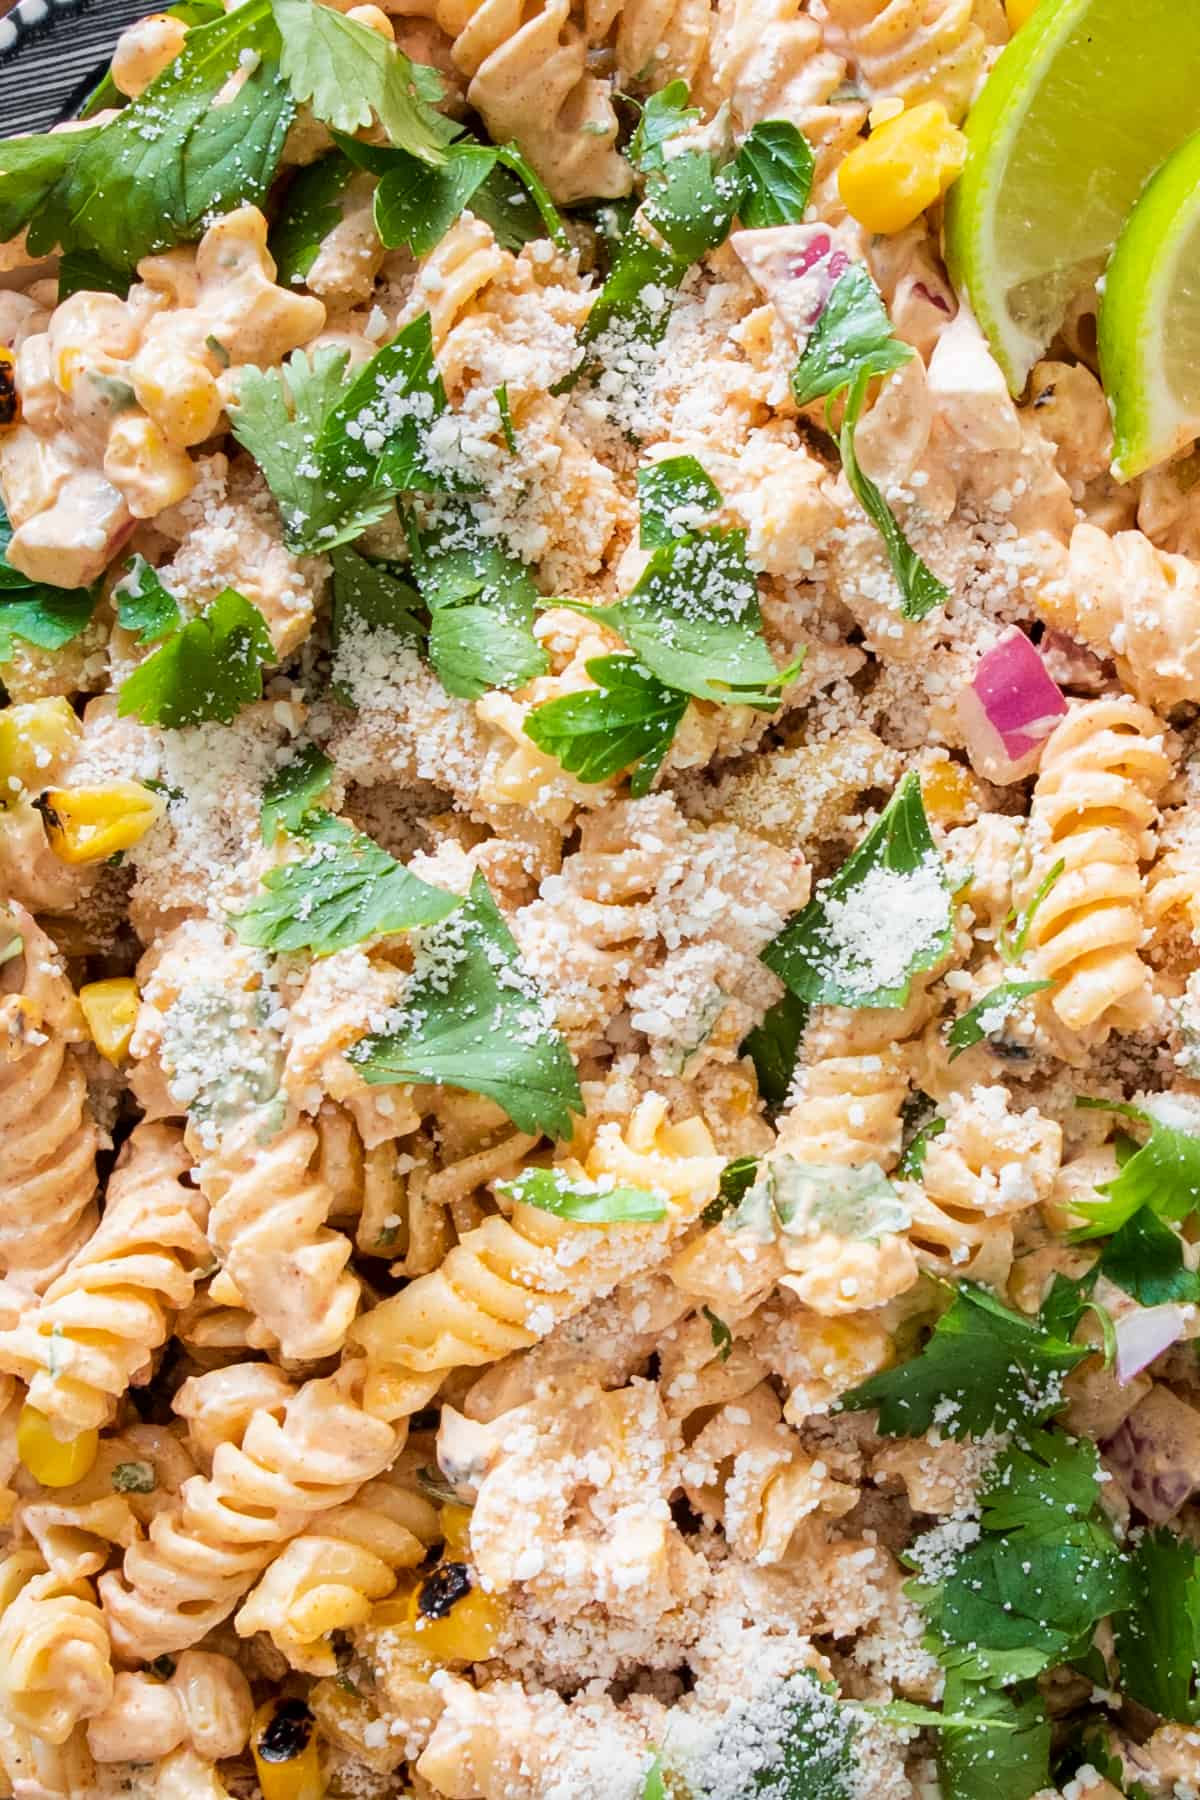 Closeup of Mexican pasta salad with cilantro sprinkled on top.